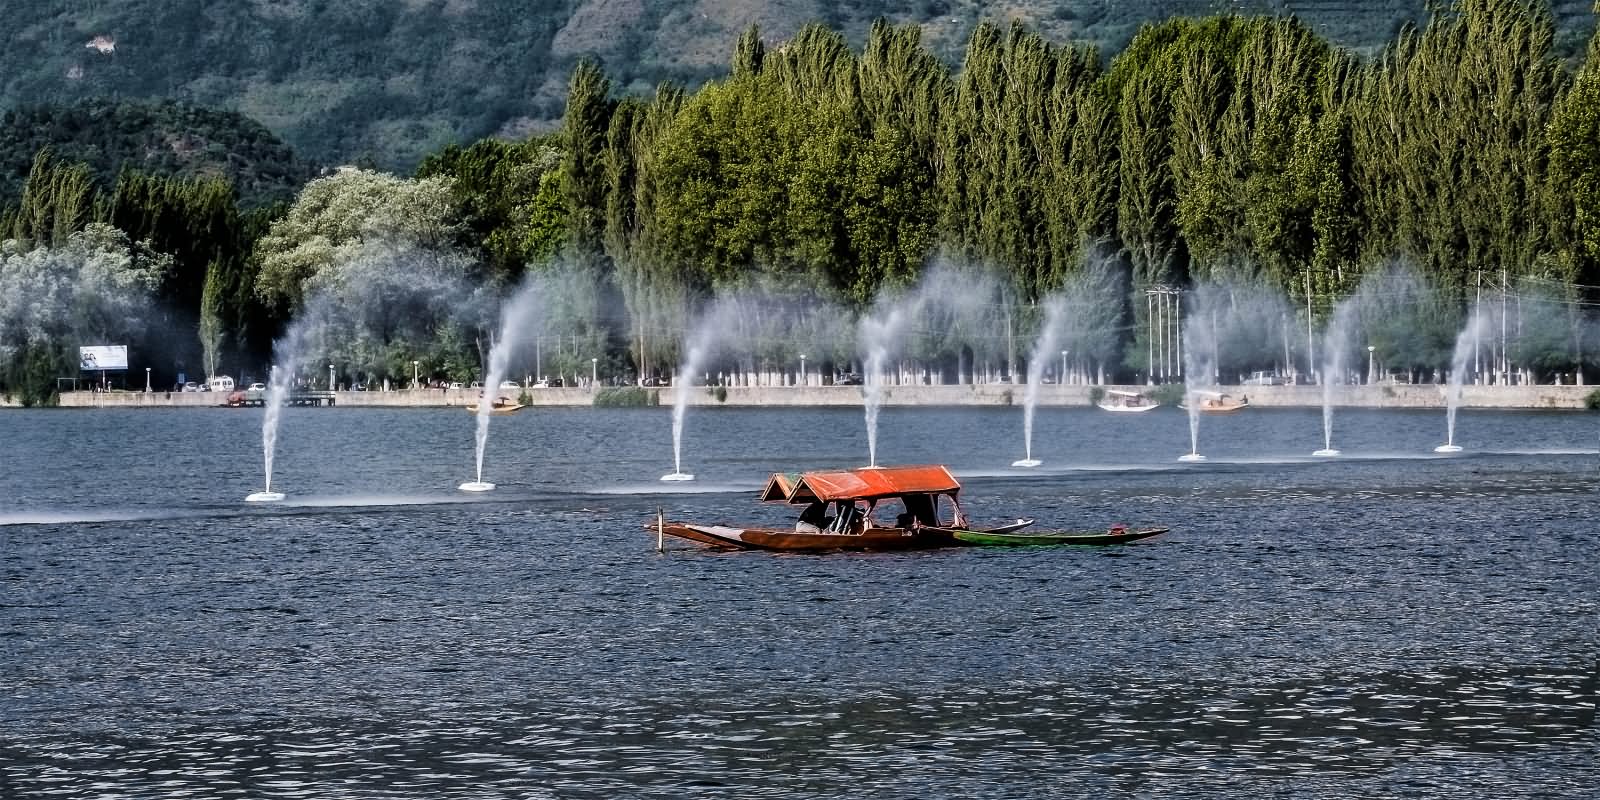 40 Most Beautiful Pictures And Images Of Dal Lake, Jammu Kashmir